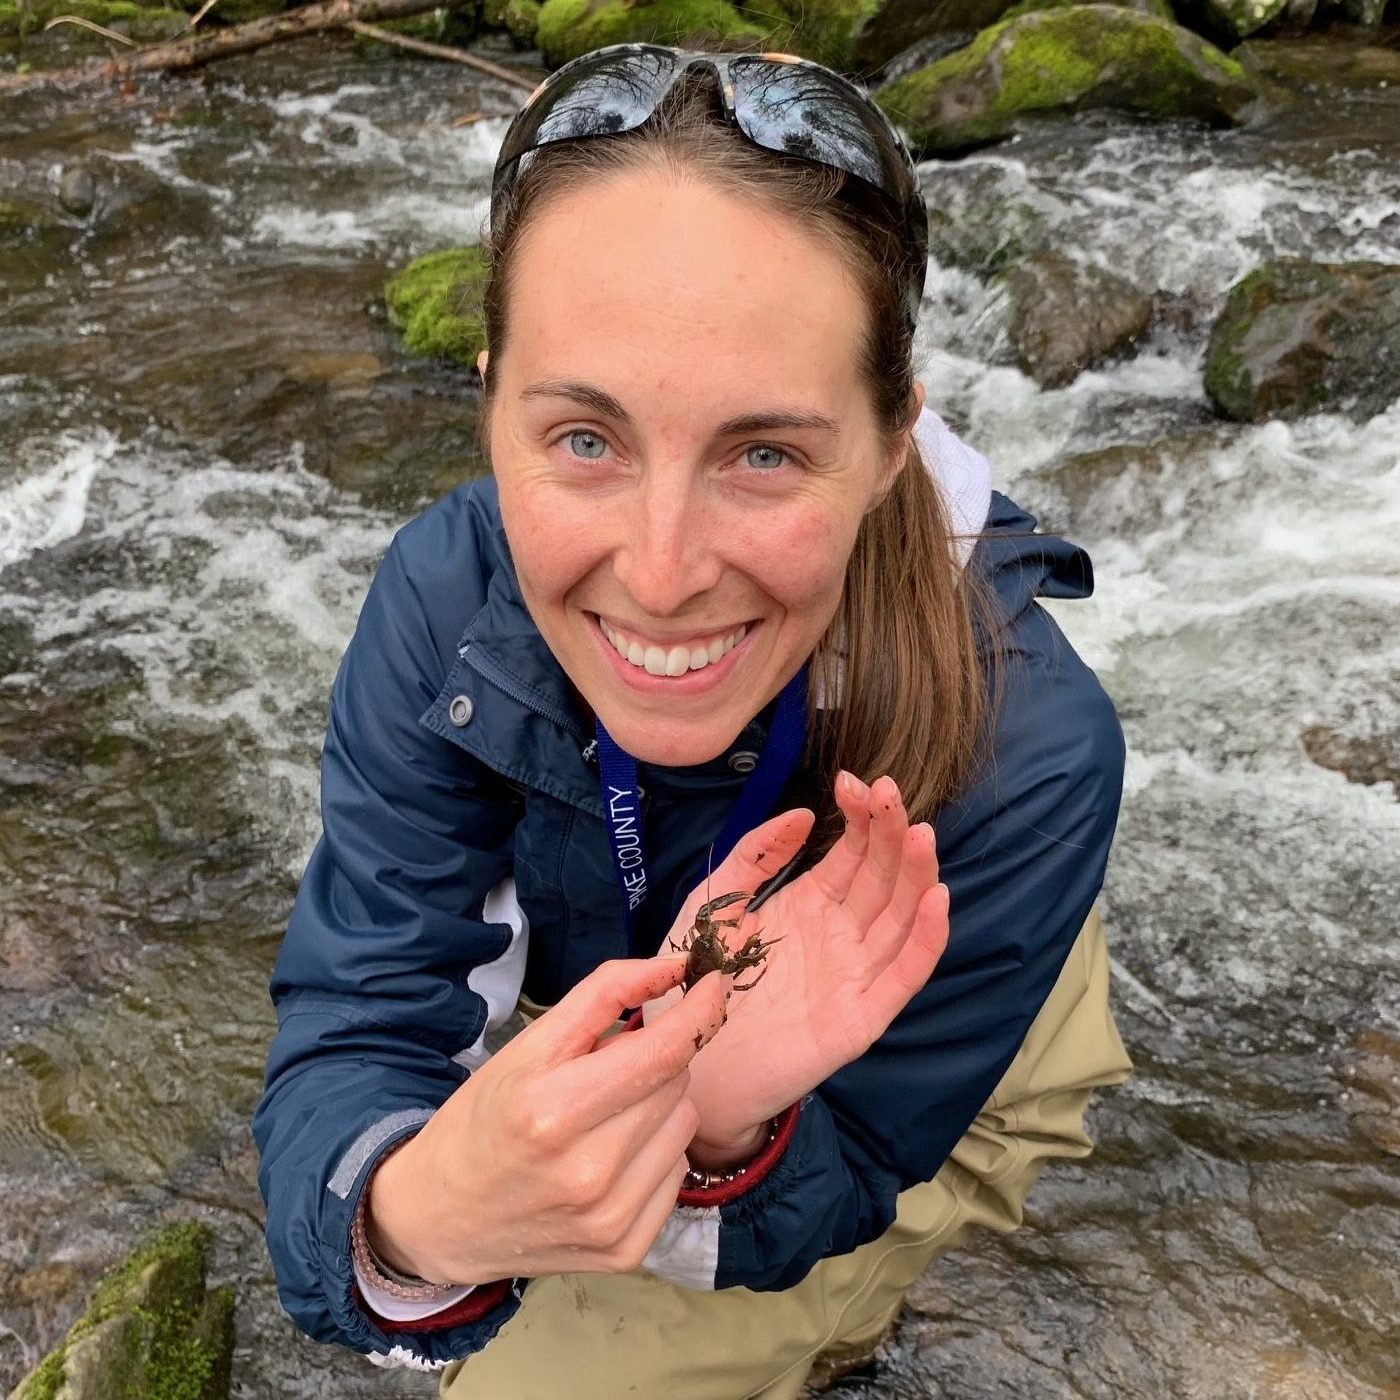 Watershed specialist, Rachel Posavetz, holds a dragonfly nymph up for the camera.